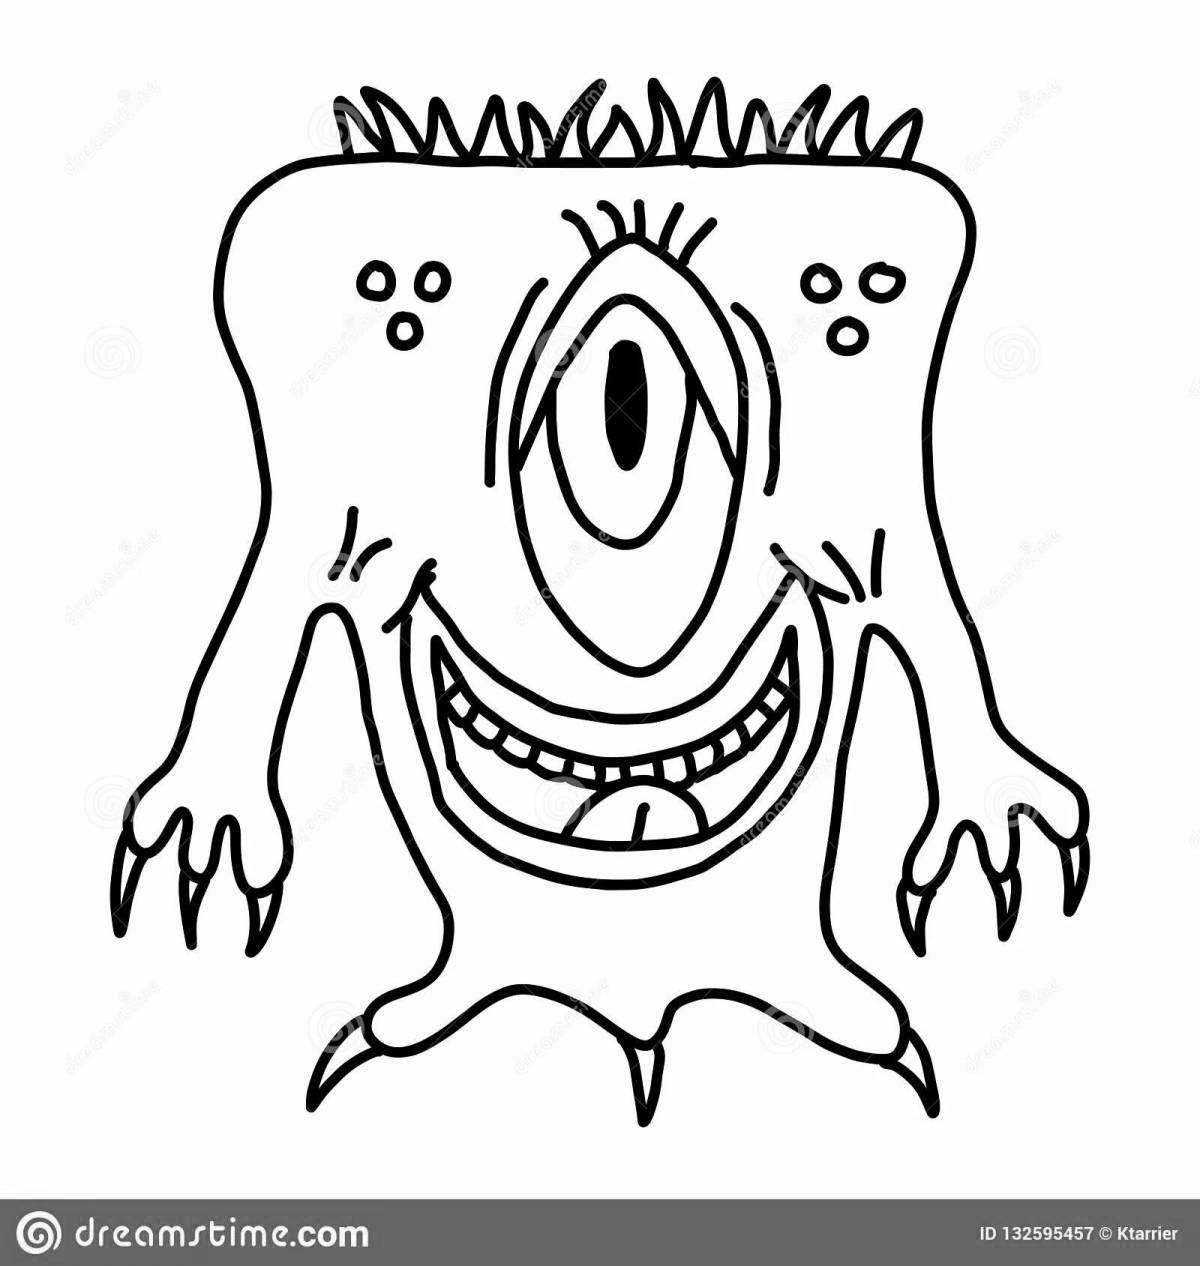 Creepy coloring pages monsters from the door